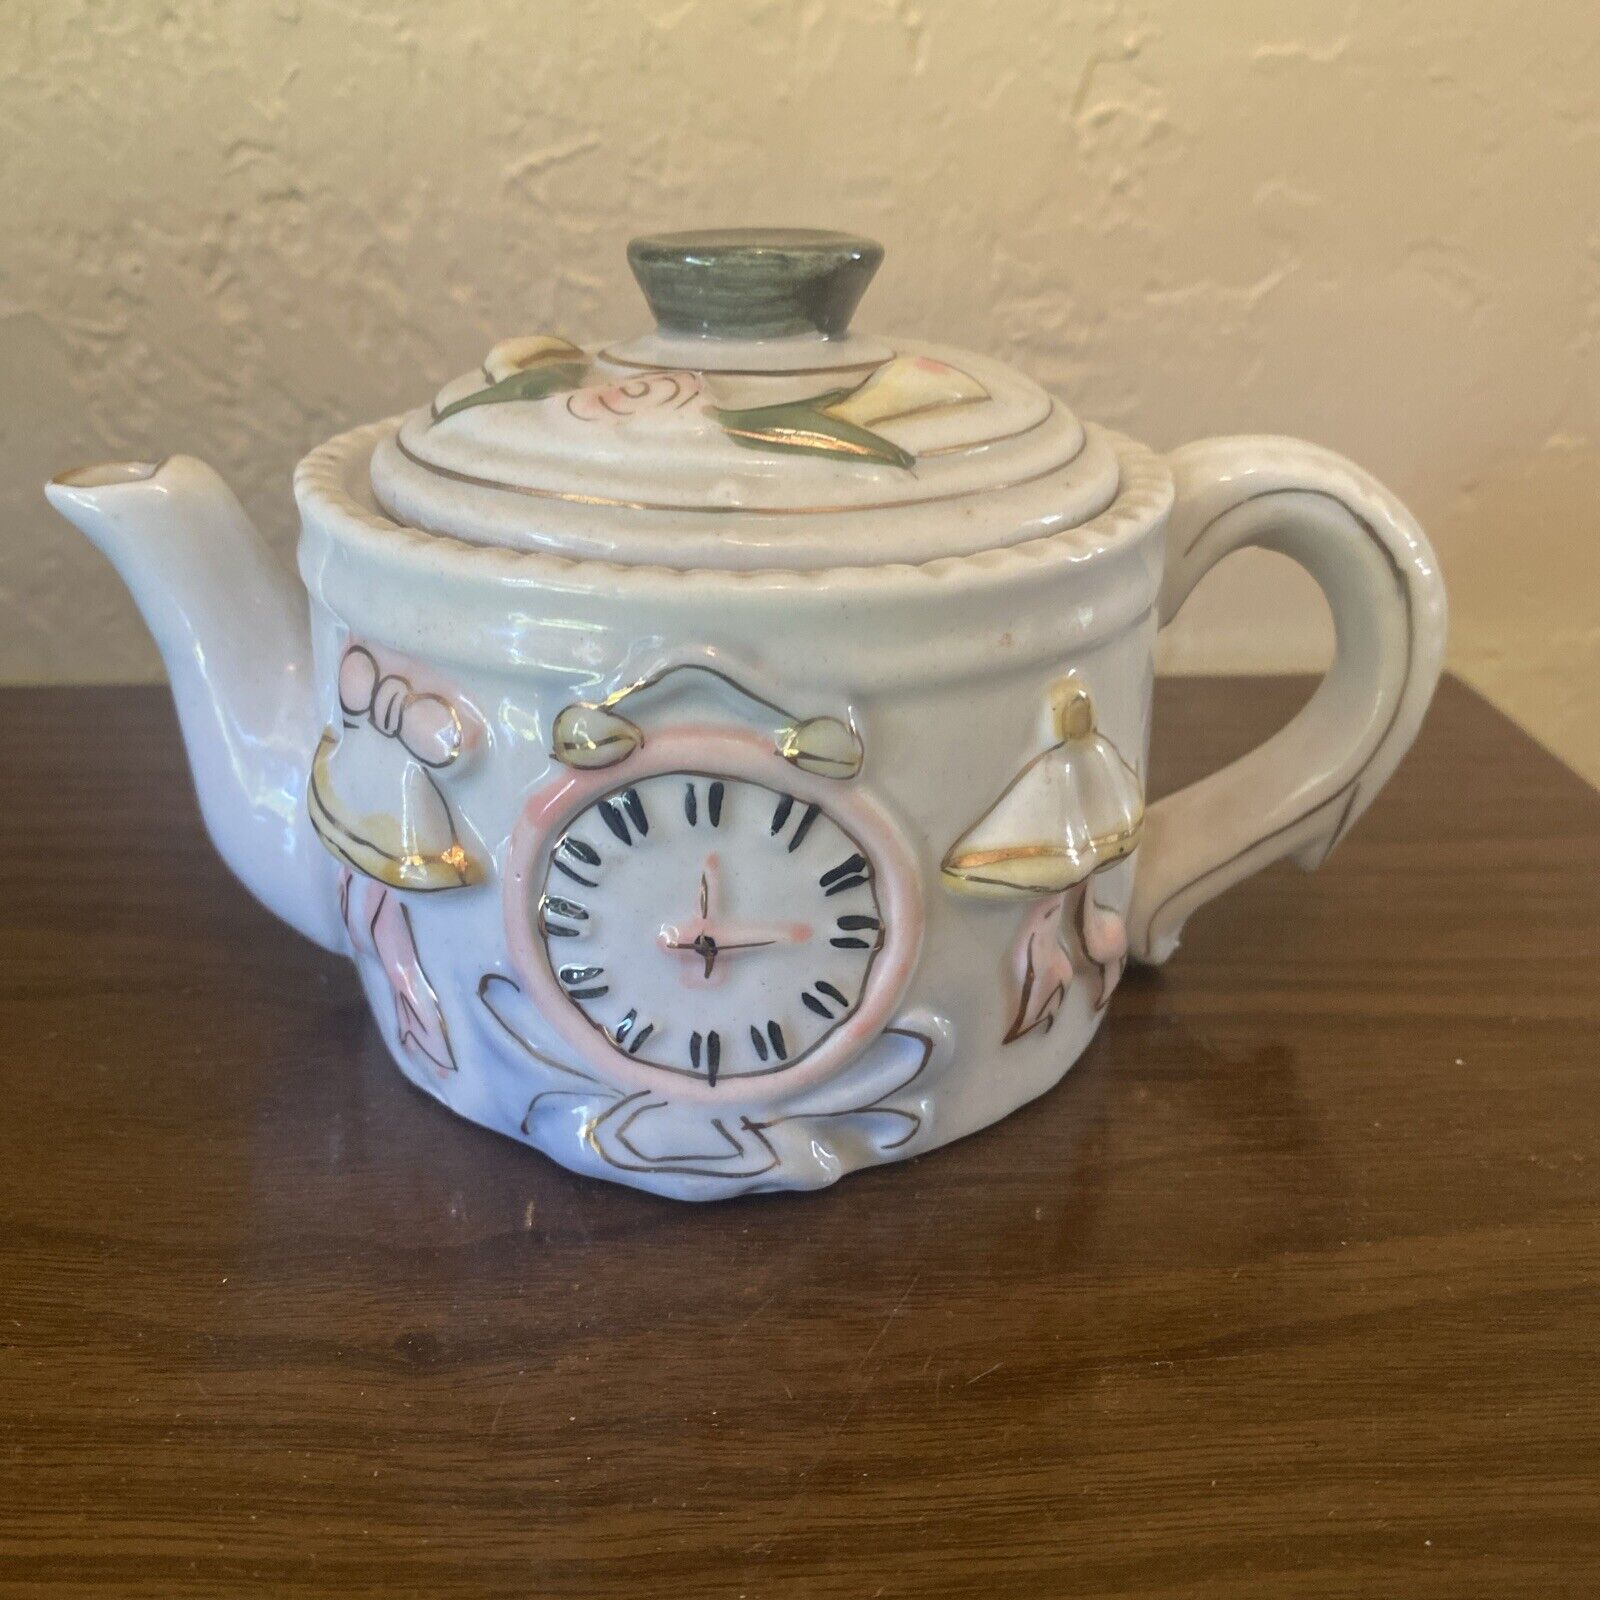 VTG Small Teapot With Clock Design 